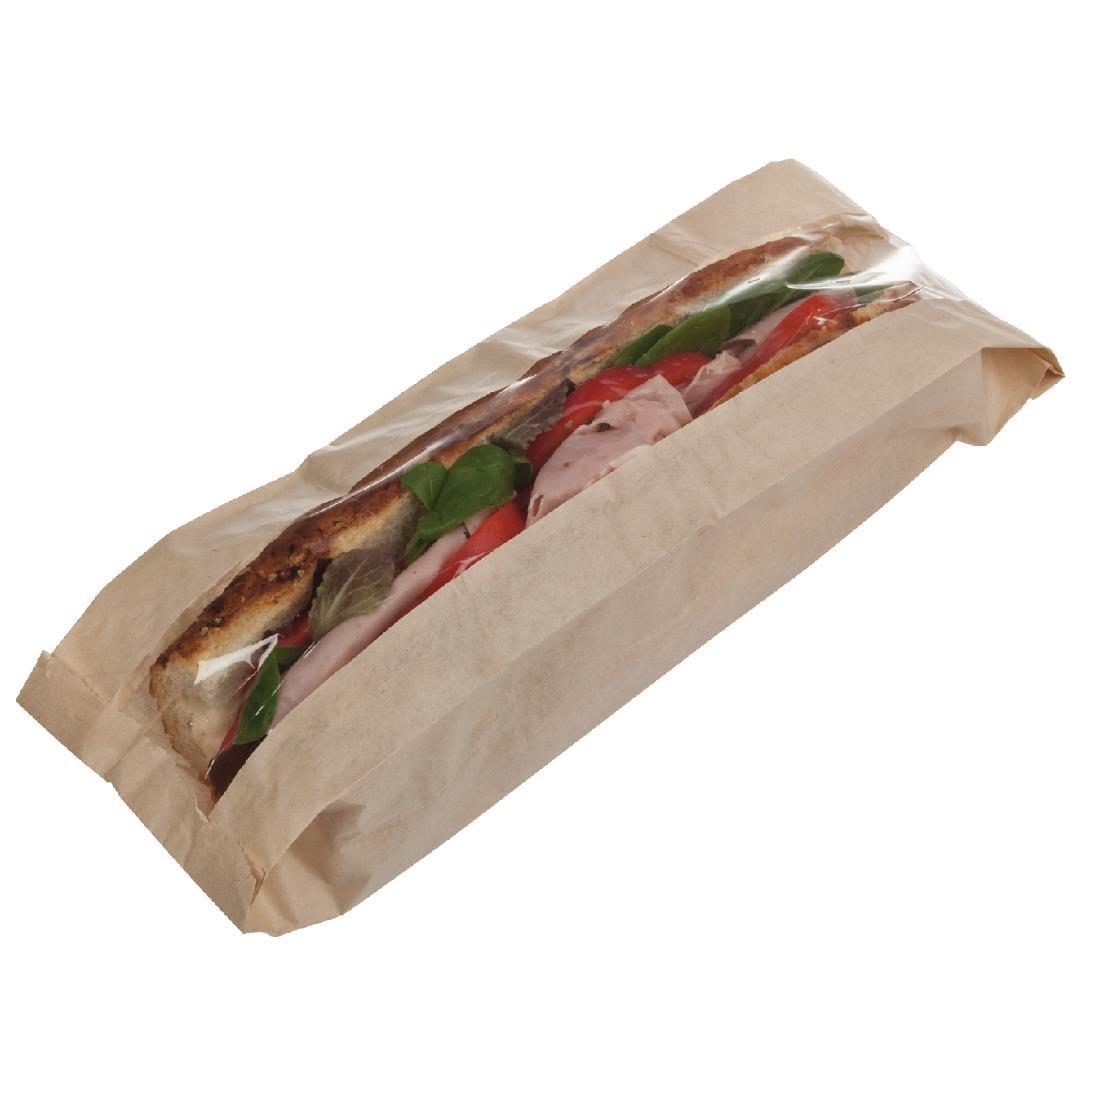 Recyclable Paper Baguette Bags (Pack of 1000) - CE249  - 1